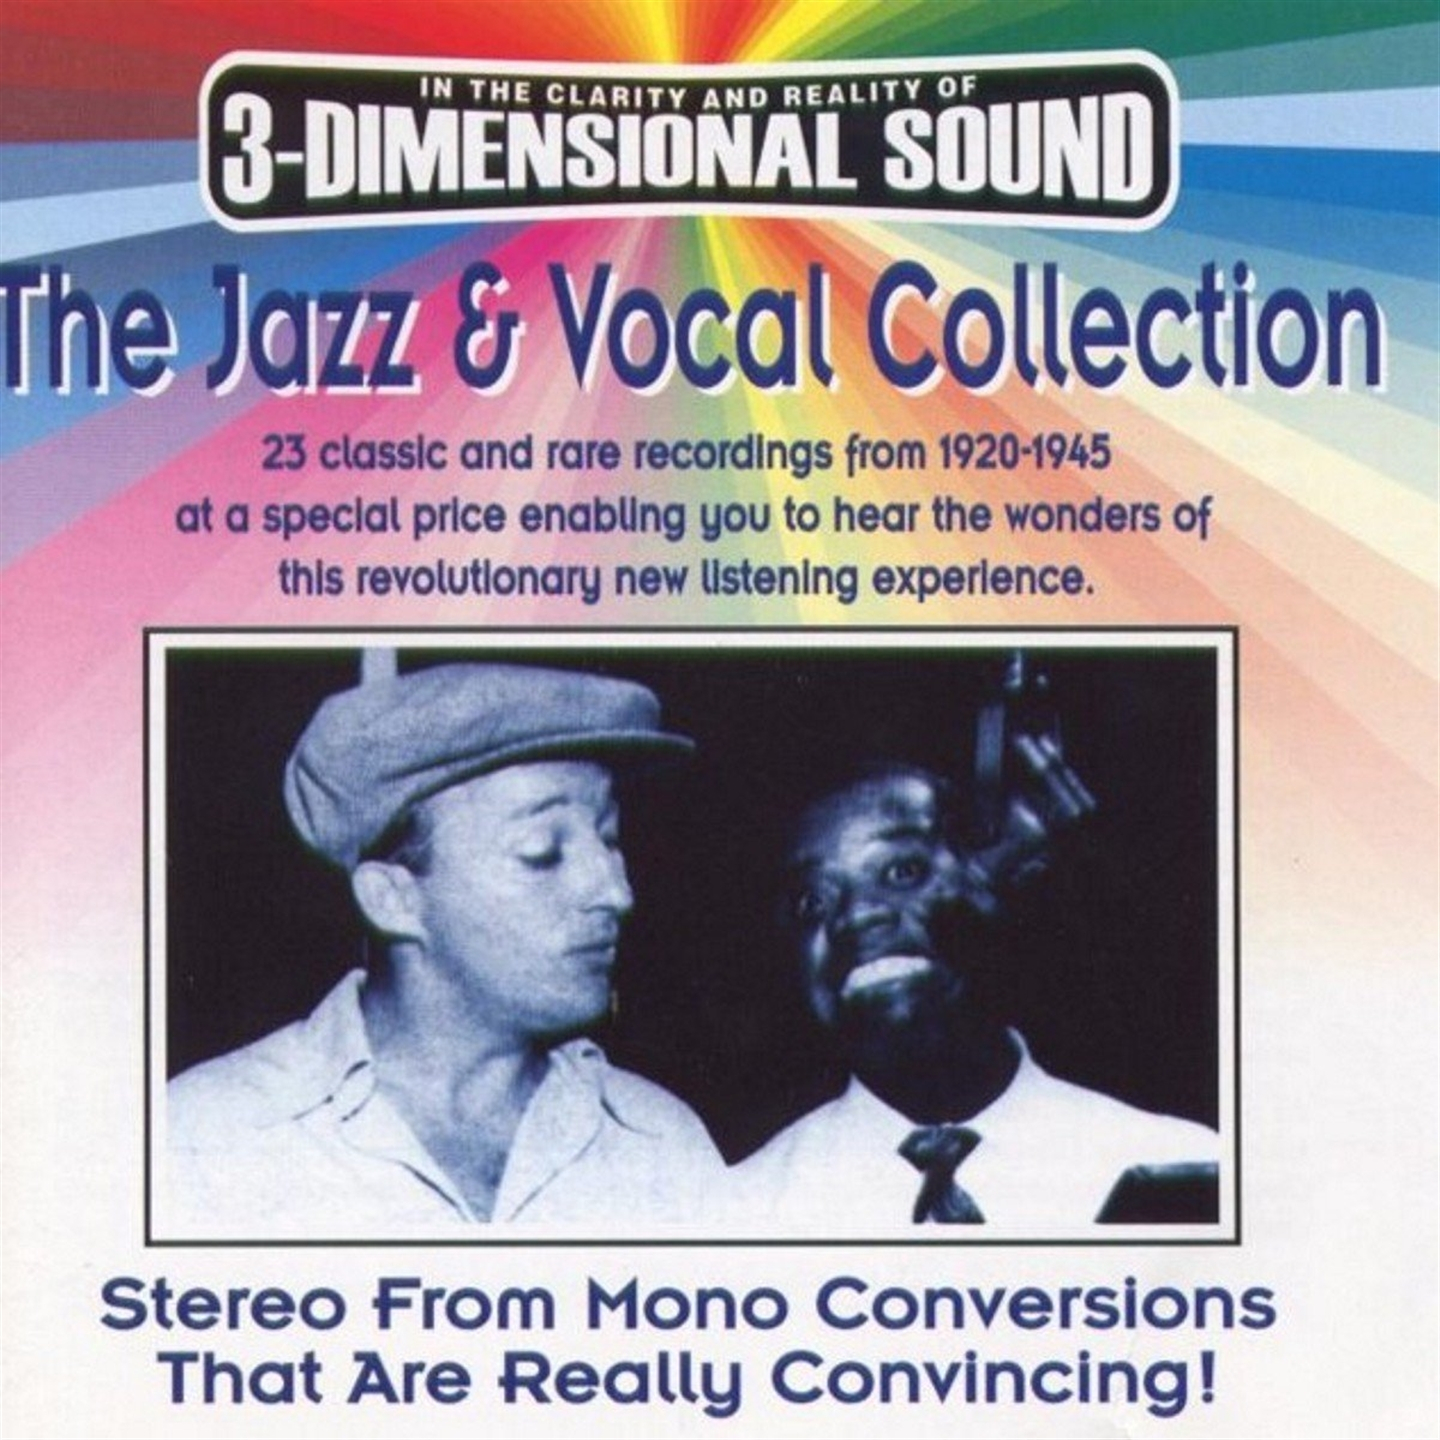 JAZZ & VOCAL COLLECTION SAMPLE